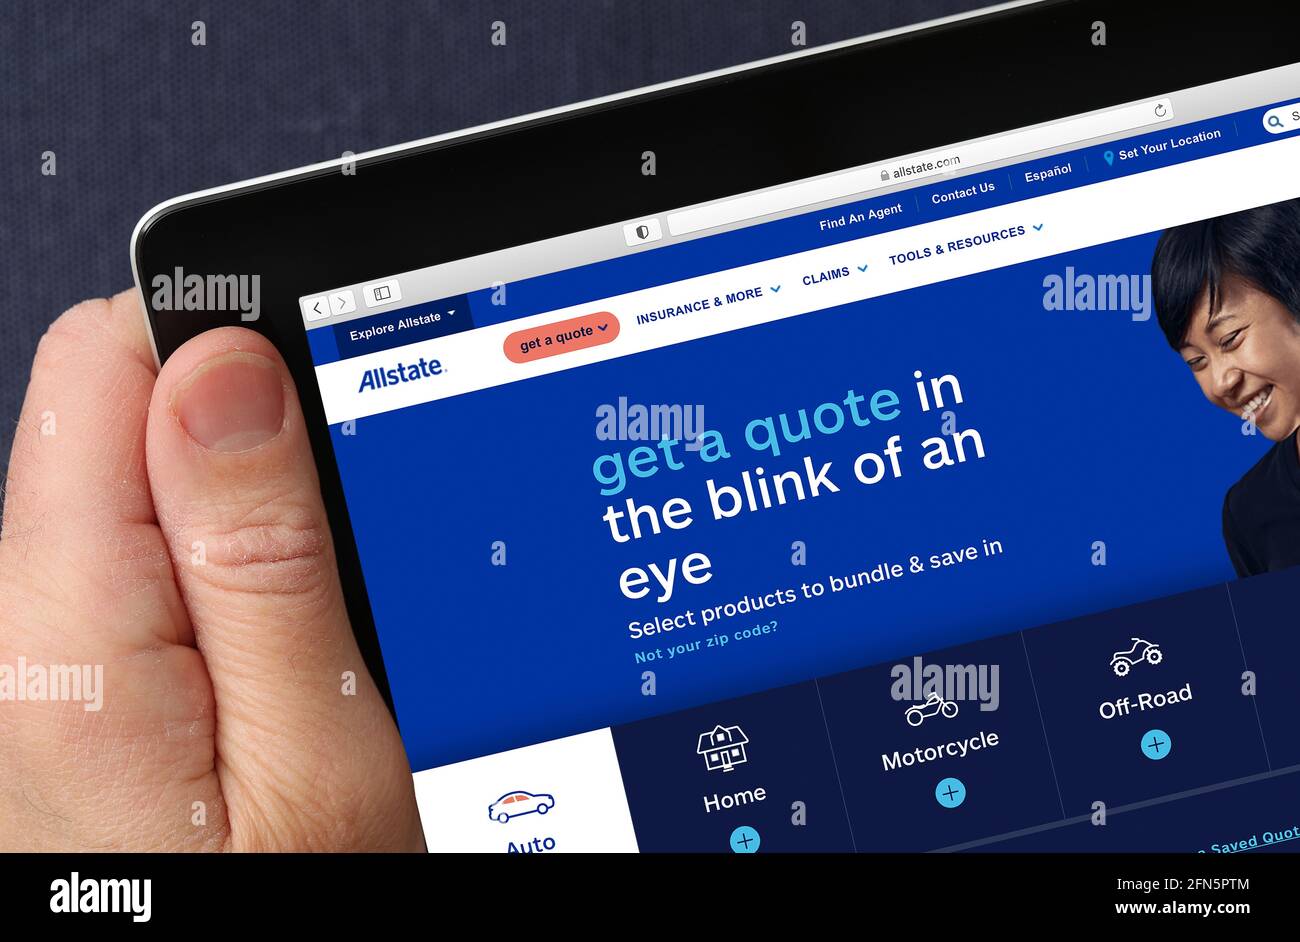 Allstate insurance website viewed on an iPad (editorial use only) Stock Photo